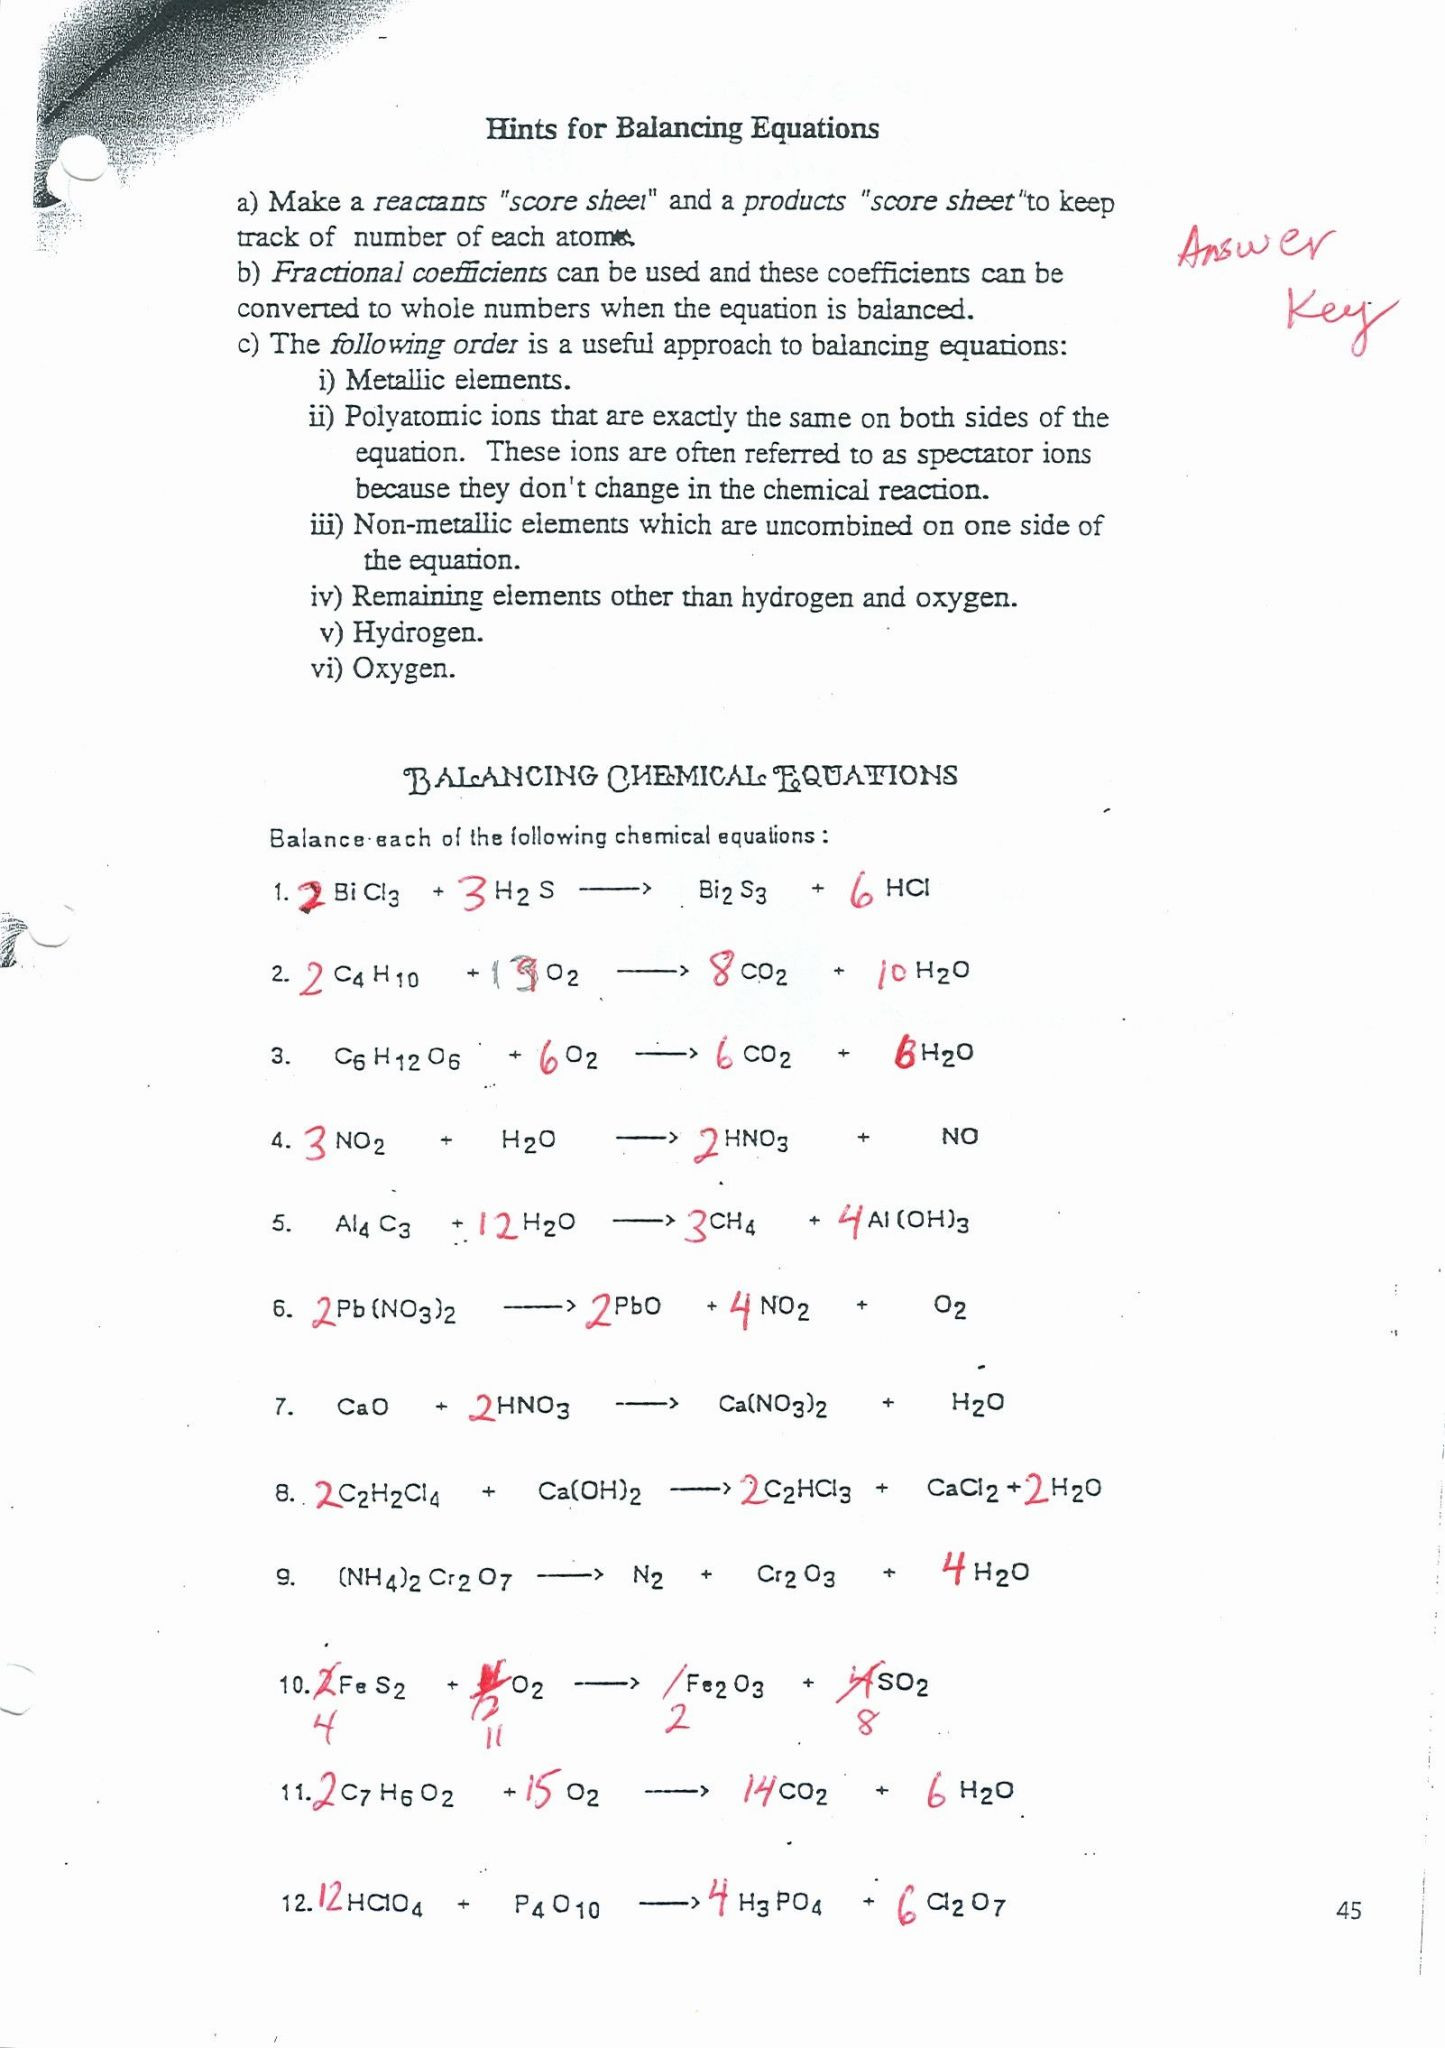 Nuclear Reactions Worksheet Answers Chemistry Worksheet Balancing Nuclear Equations Answers